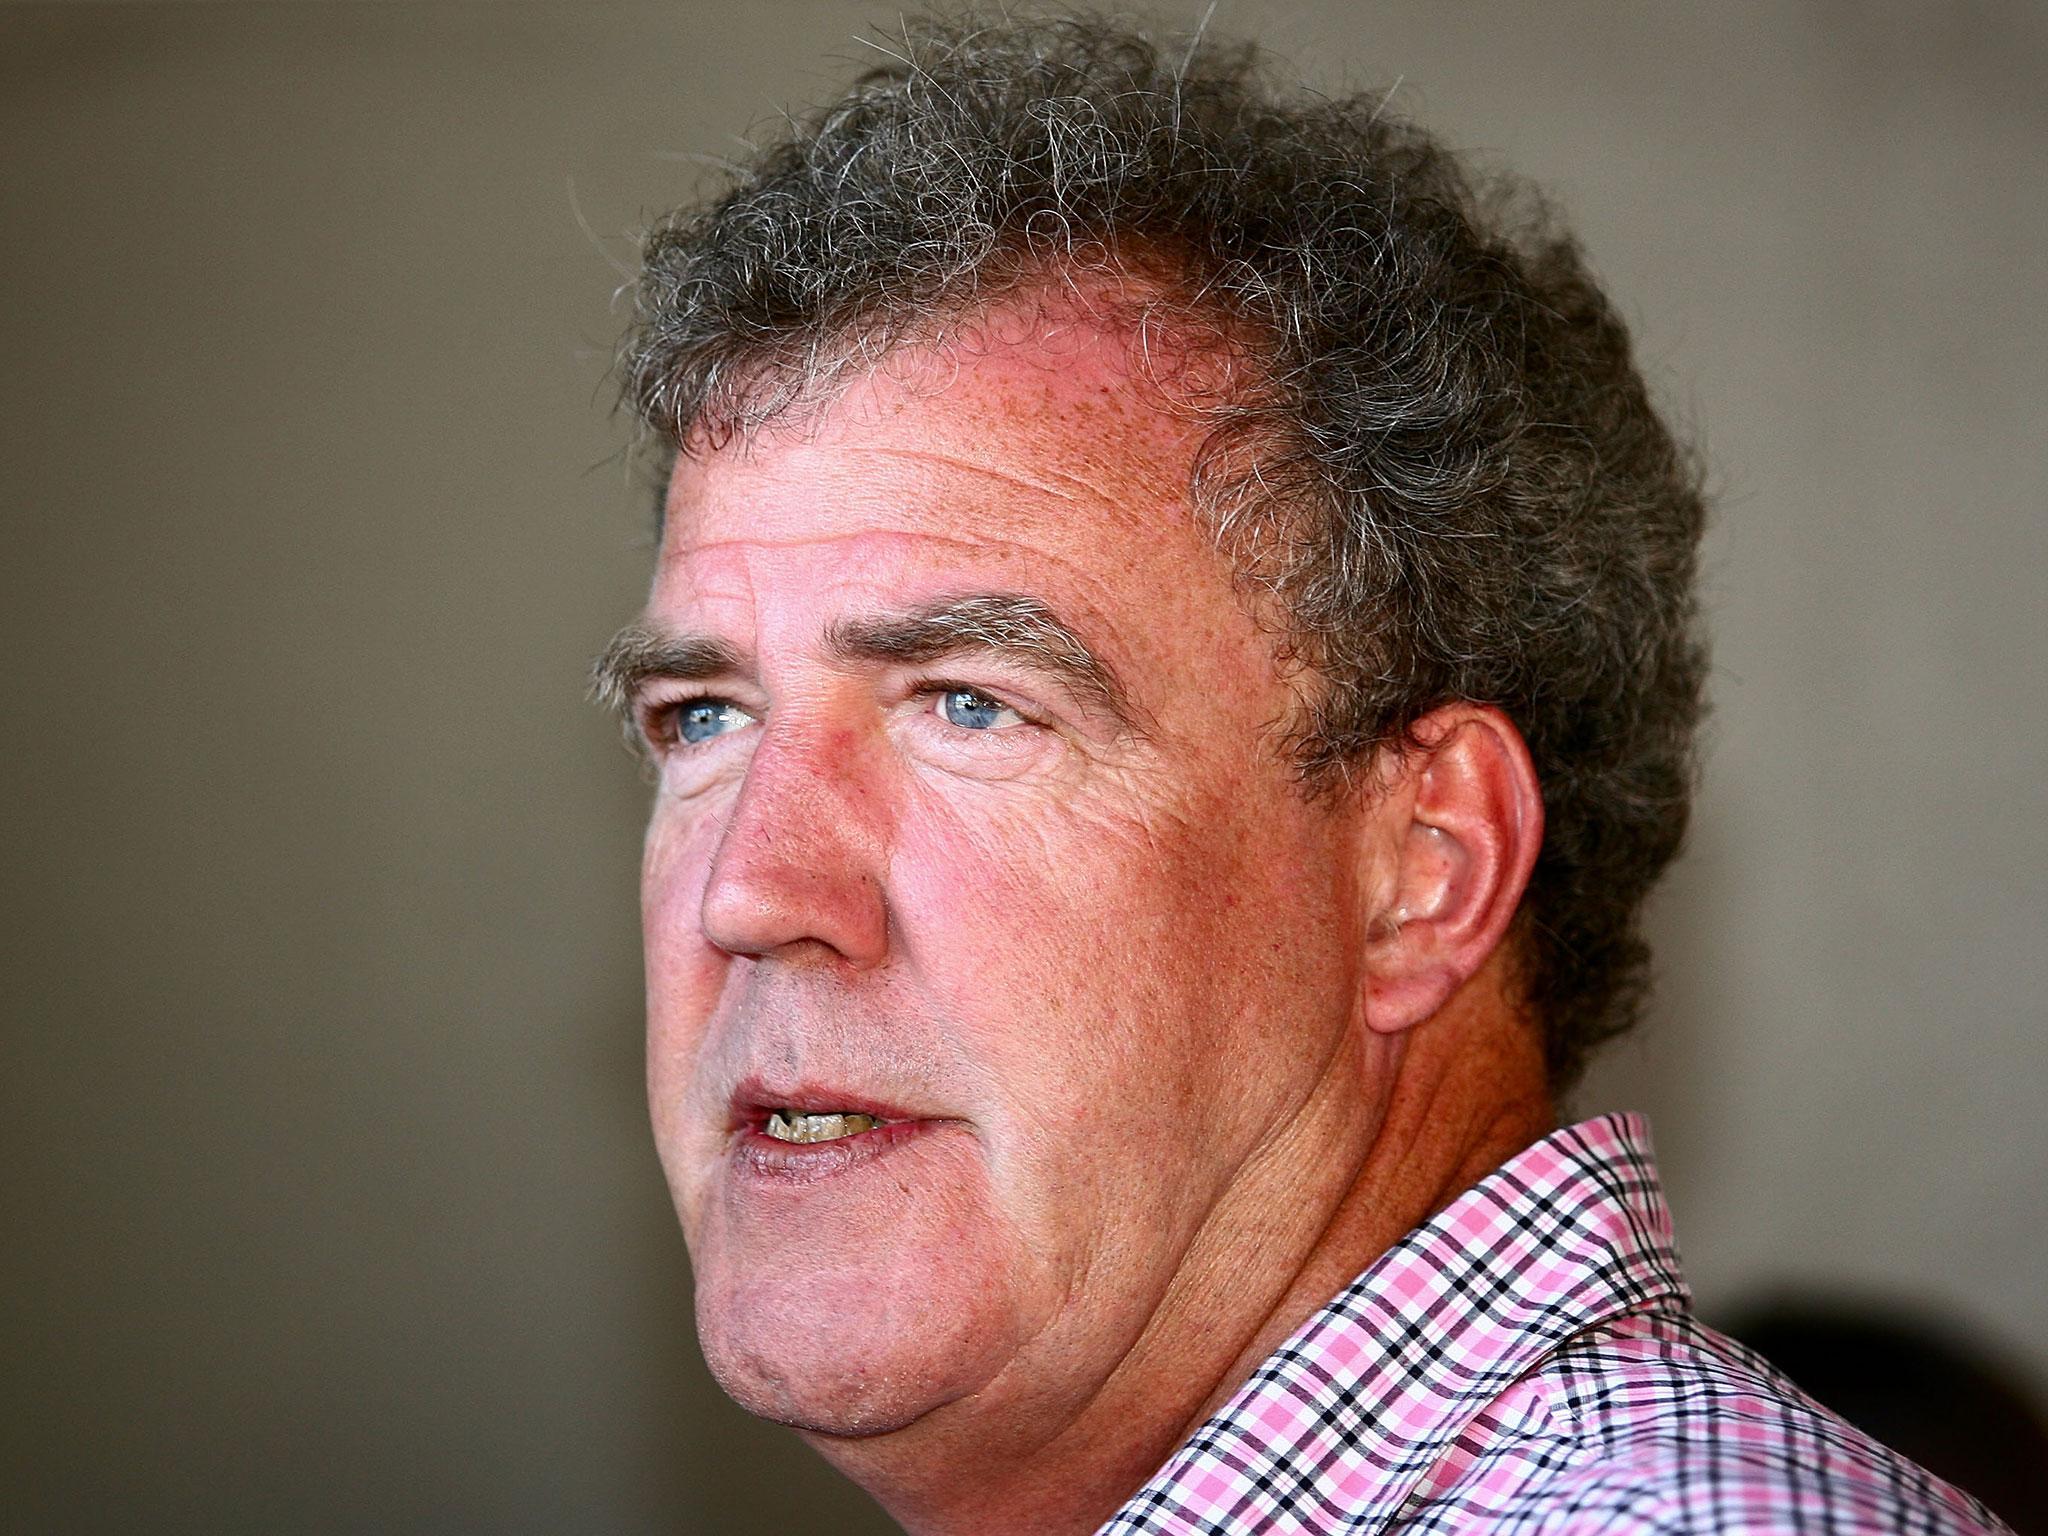 Clarkson challenged Audi to test out its car on the Death Road in Bolivia